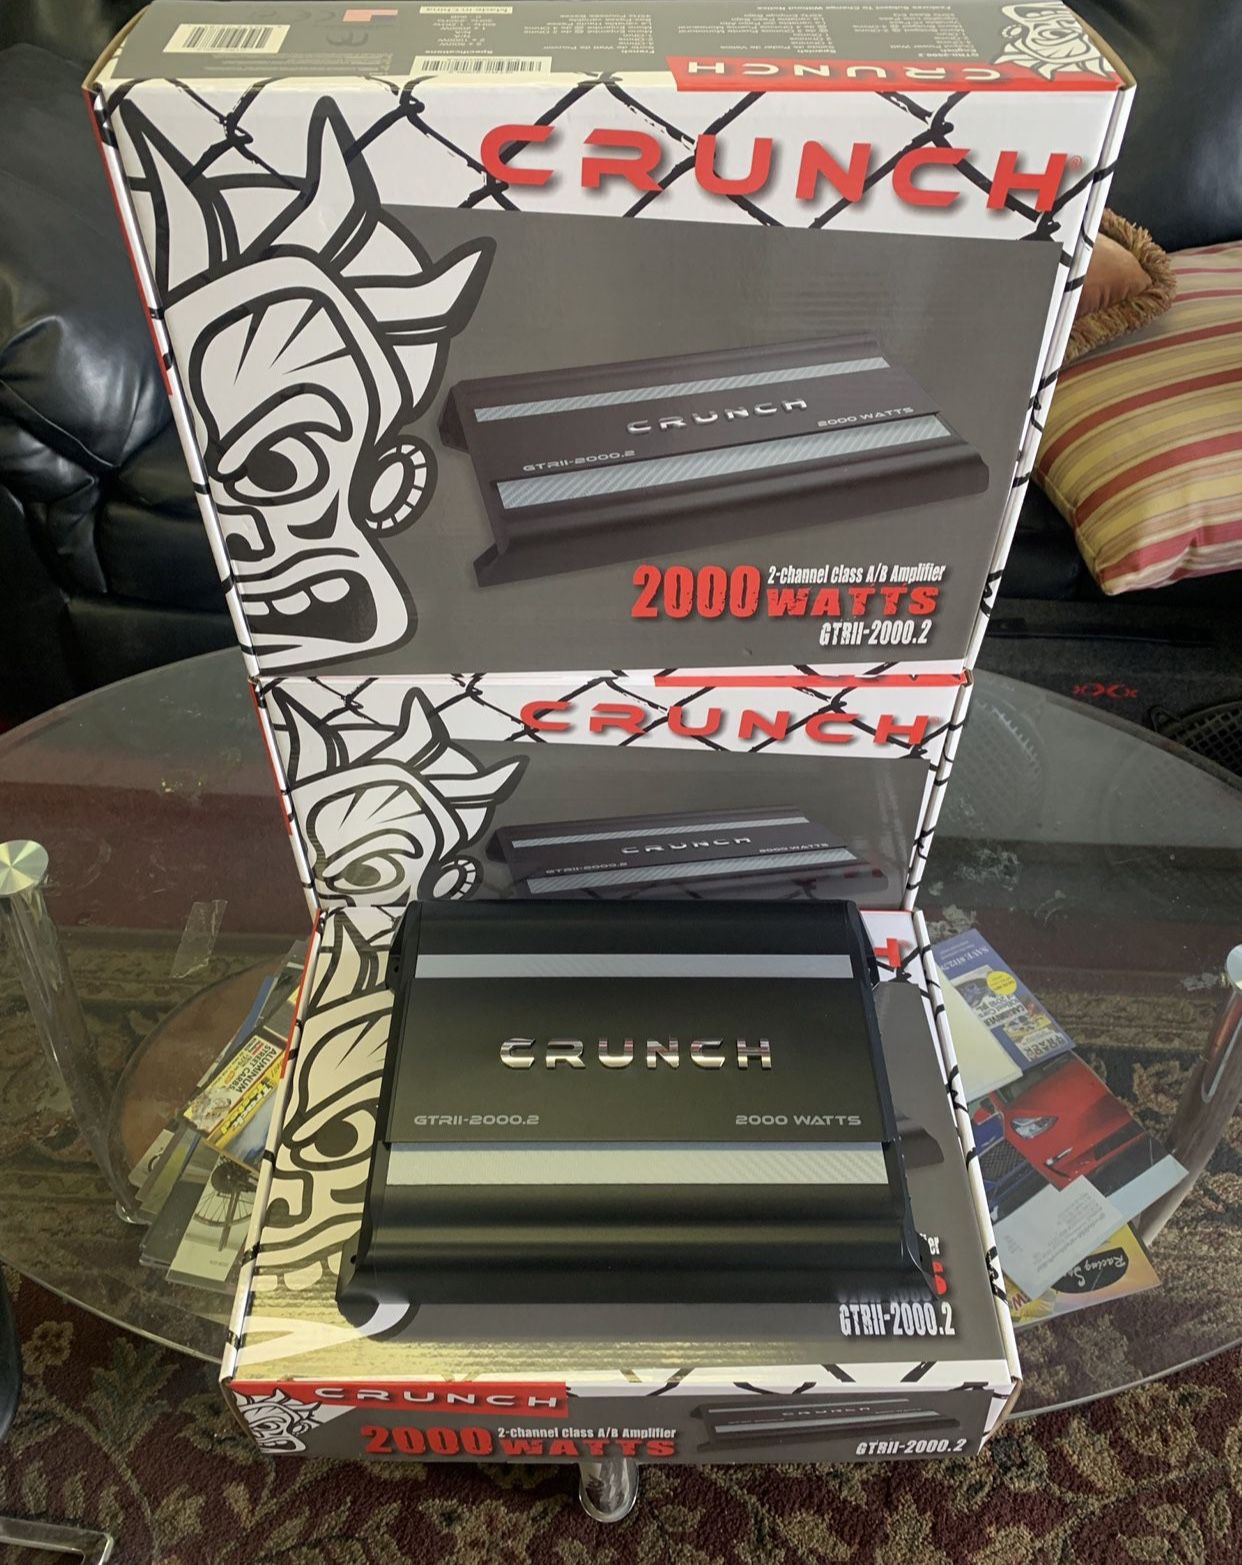 Crunch Car Audio Car Stereo Amplifier . 2000 watts . Holiday Super Sale $75 While They Last . New